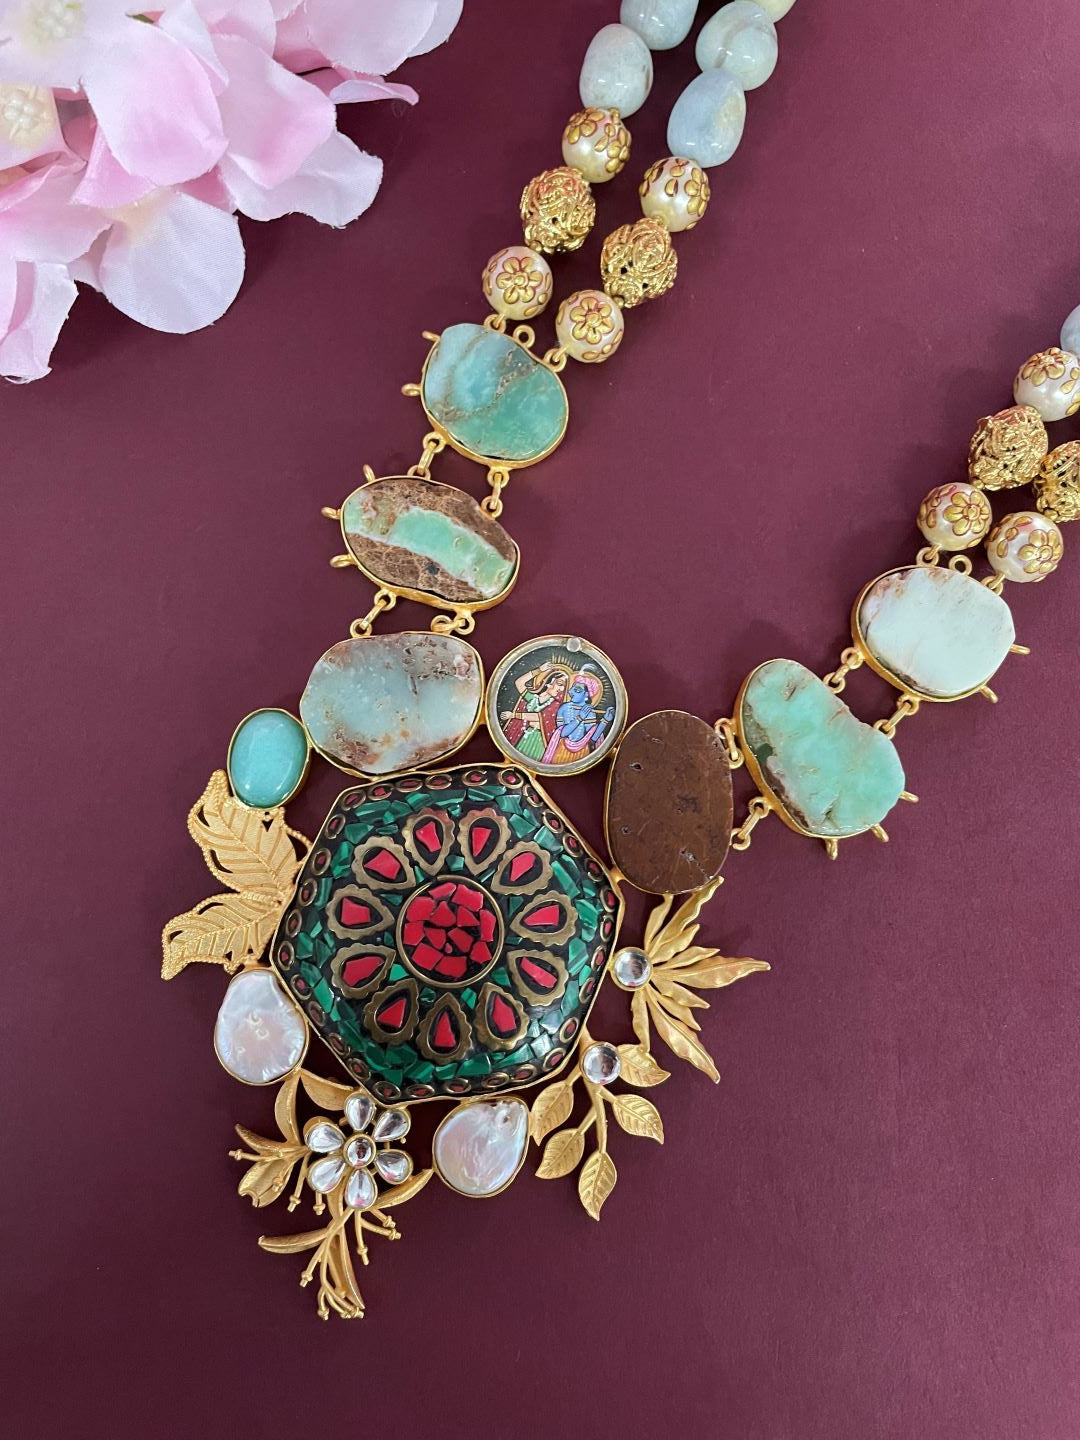 image for Unique Handmade Tibetan Gold Plated Necklace with Radha Krishna ,Pearls, Moonstone And Tiger Eye Semi Precious Stones